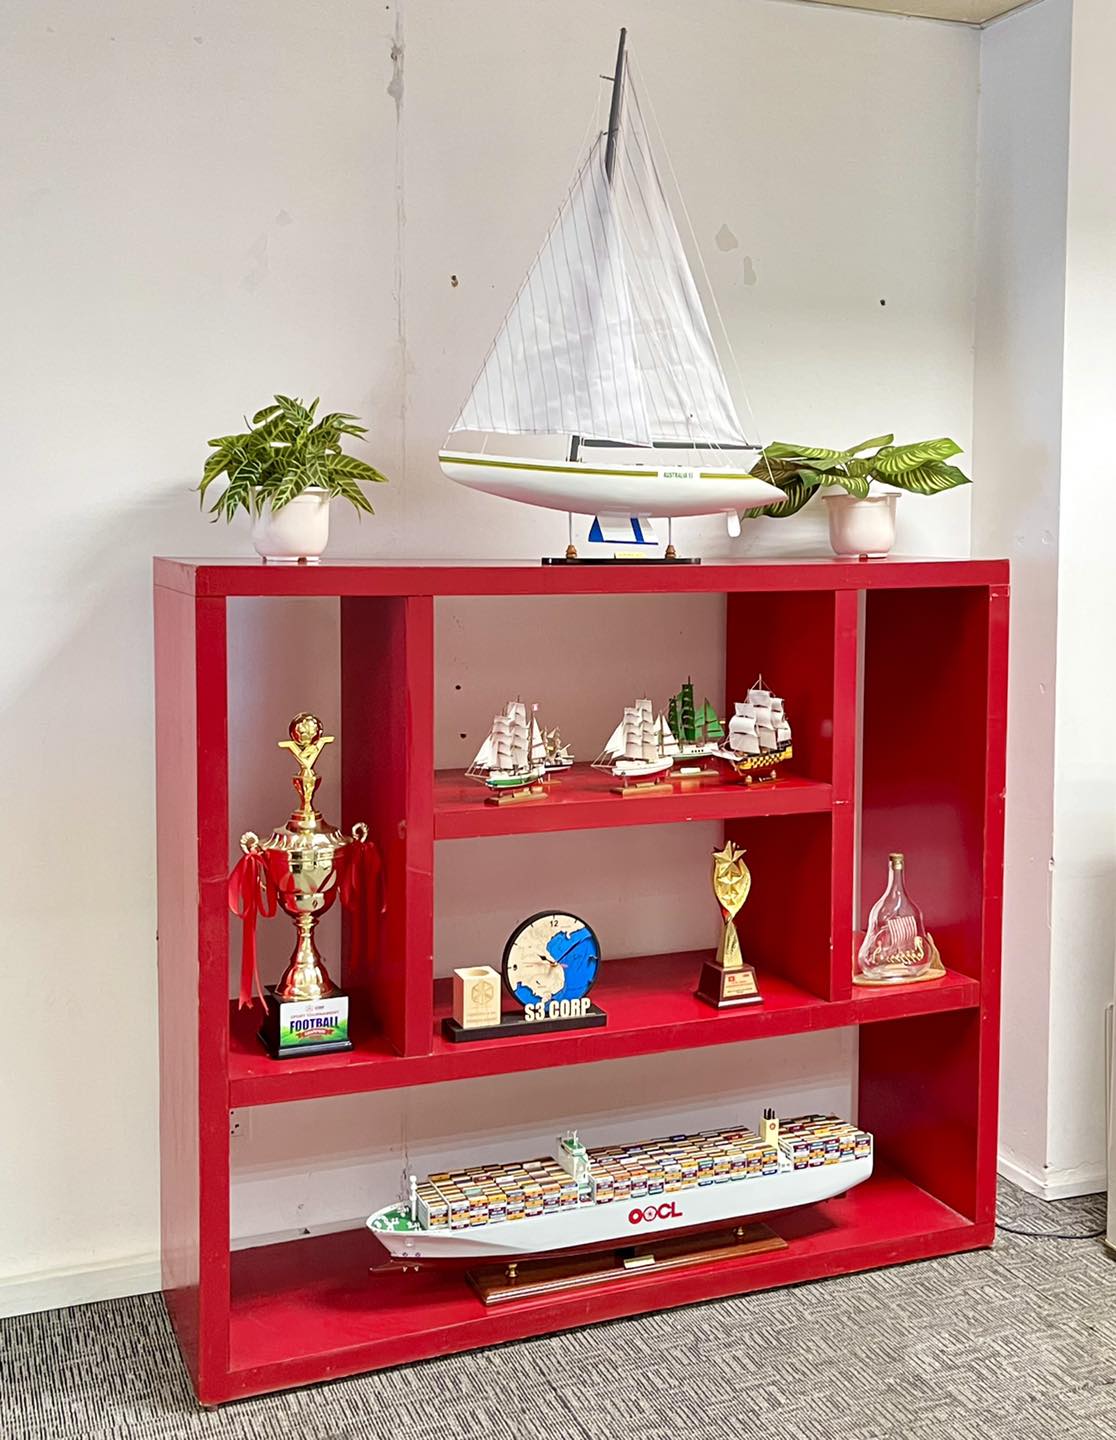 5 Ways To Display Model Boats In The Office